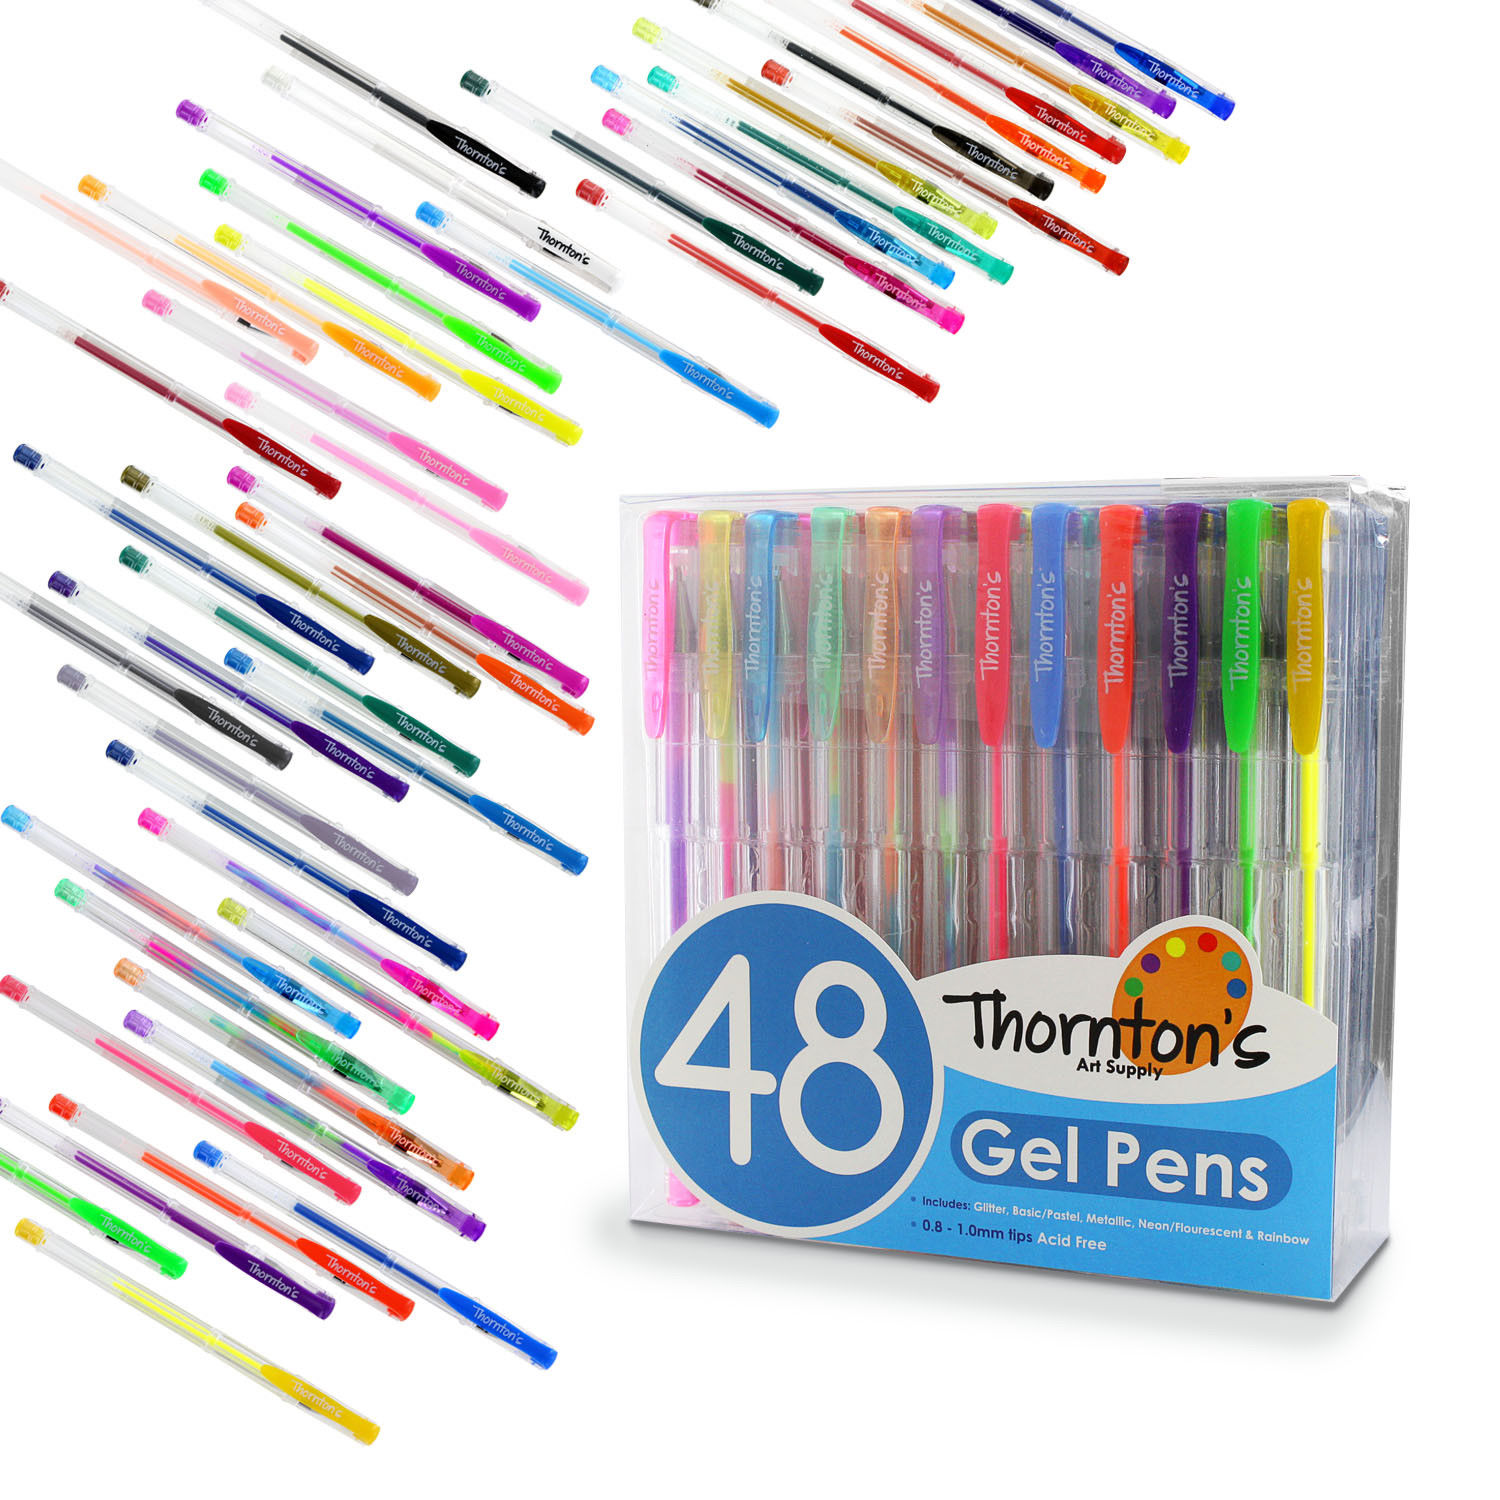 48 Thornton’s Assorted Art Colors Craft School Sketch Gel Pen Only $6.99 Shipped!